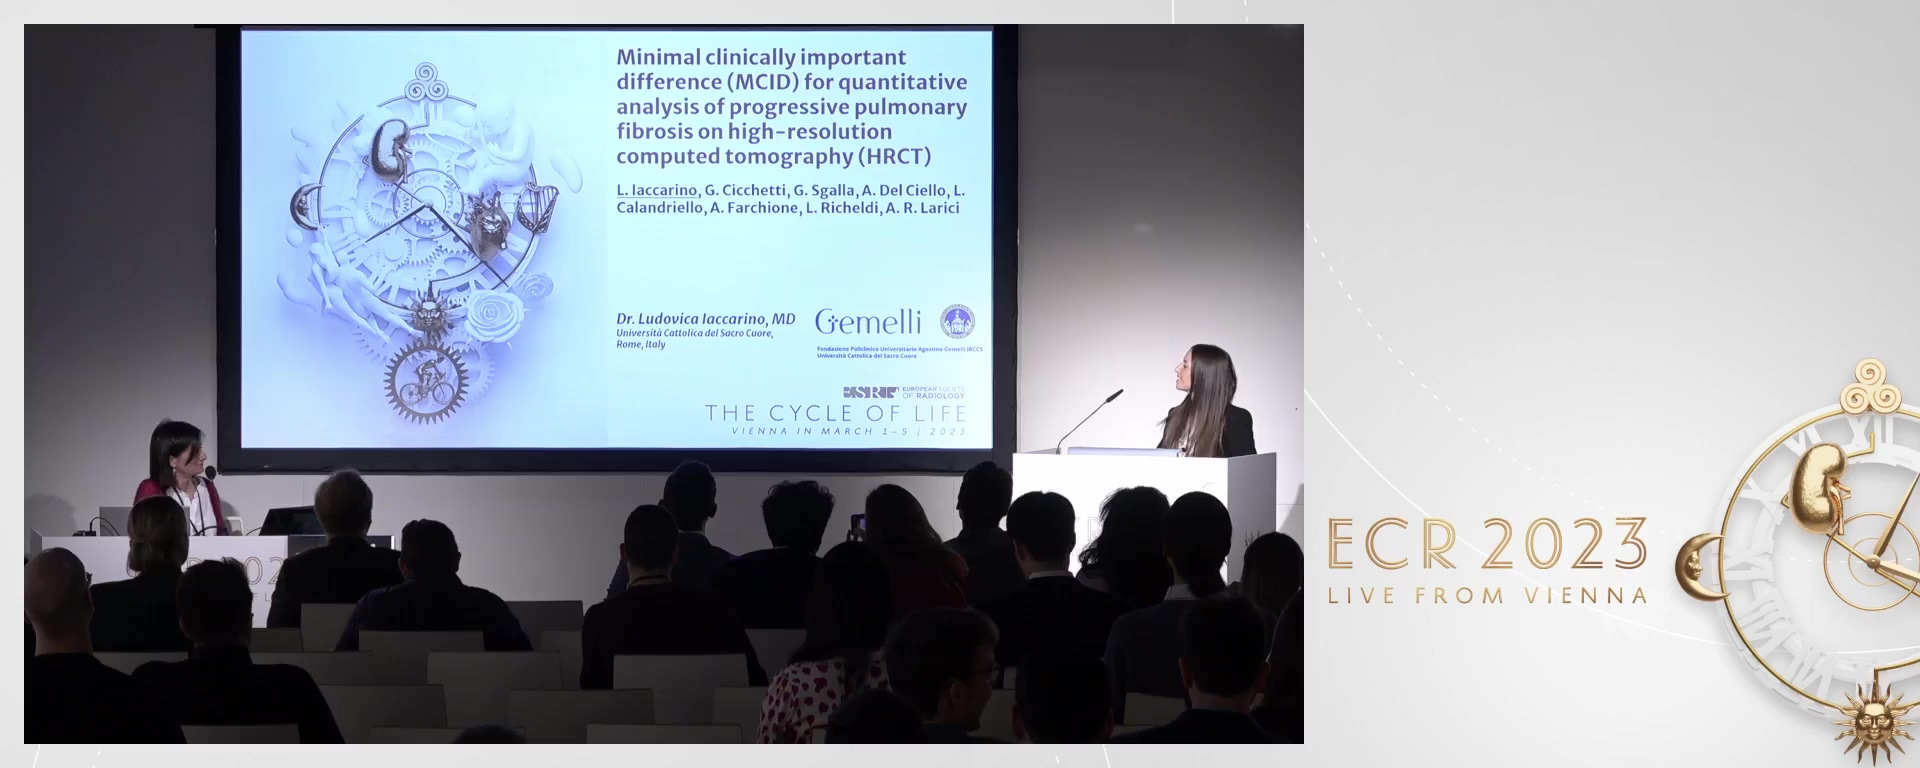 Minimal clinically important difference (MCID) for quantitative analysis of progressive pulmonary fibrosis on high-resolution computed tomography (HRCT) - Ludovica  Iaccarino, Rome / IT